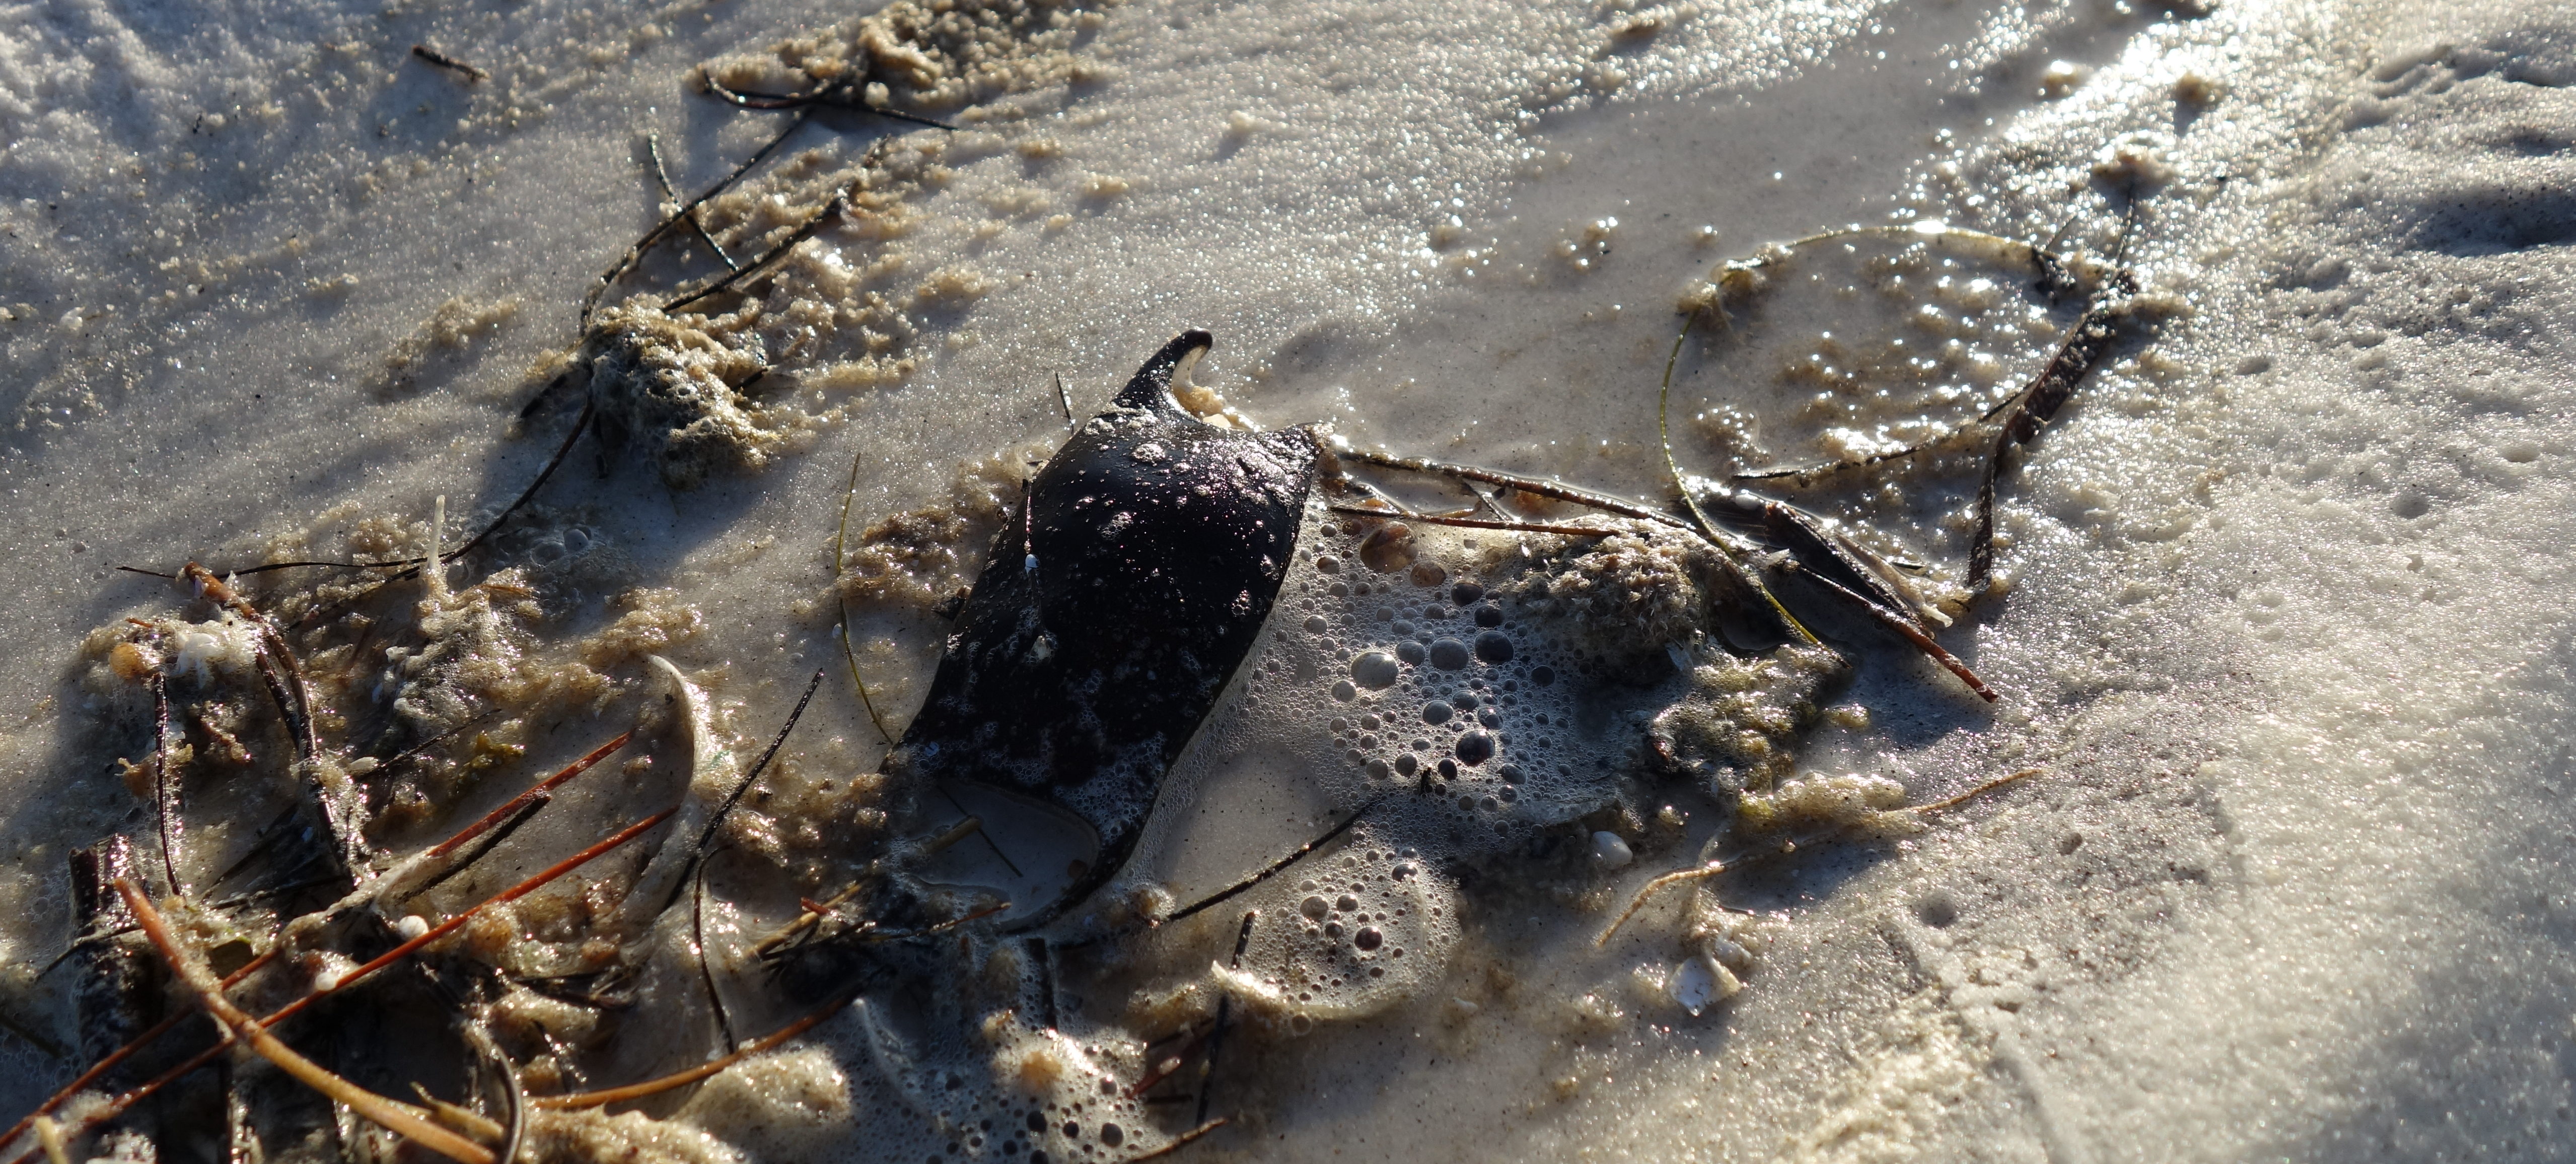 mermaid's purse, Topsail Hill Preserve, Fins to Spurs, #GetYourFinsOn